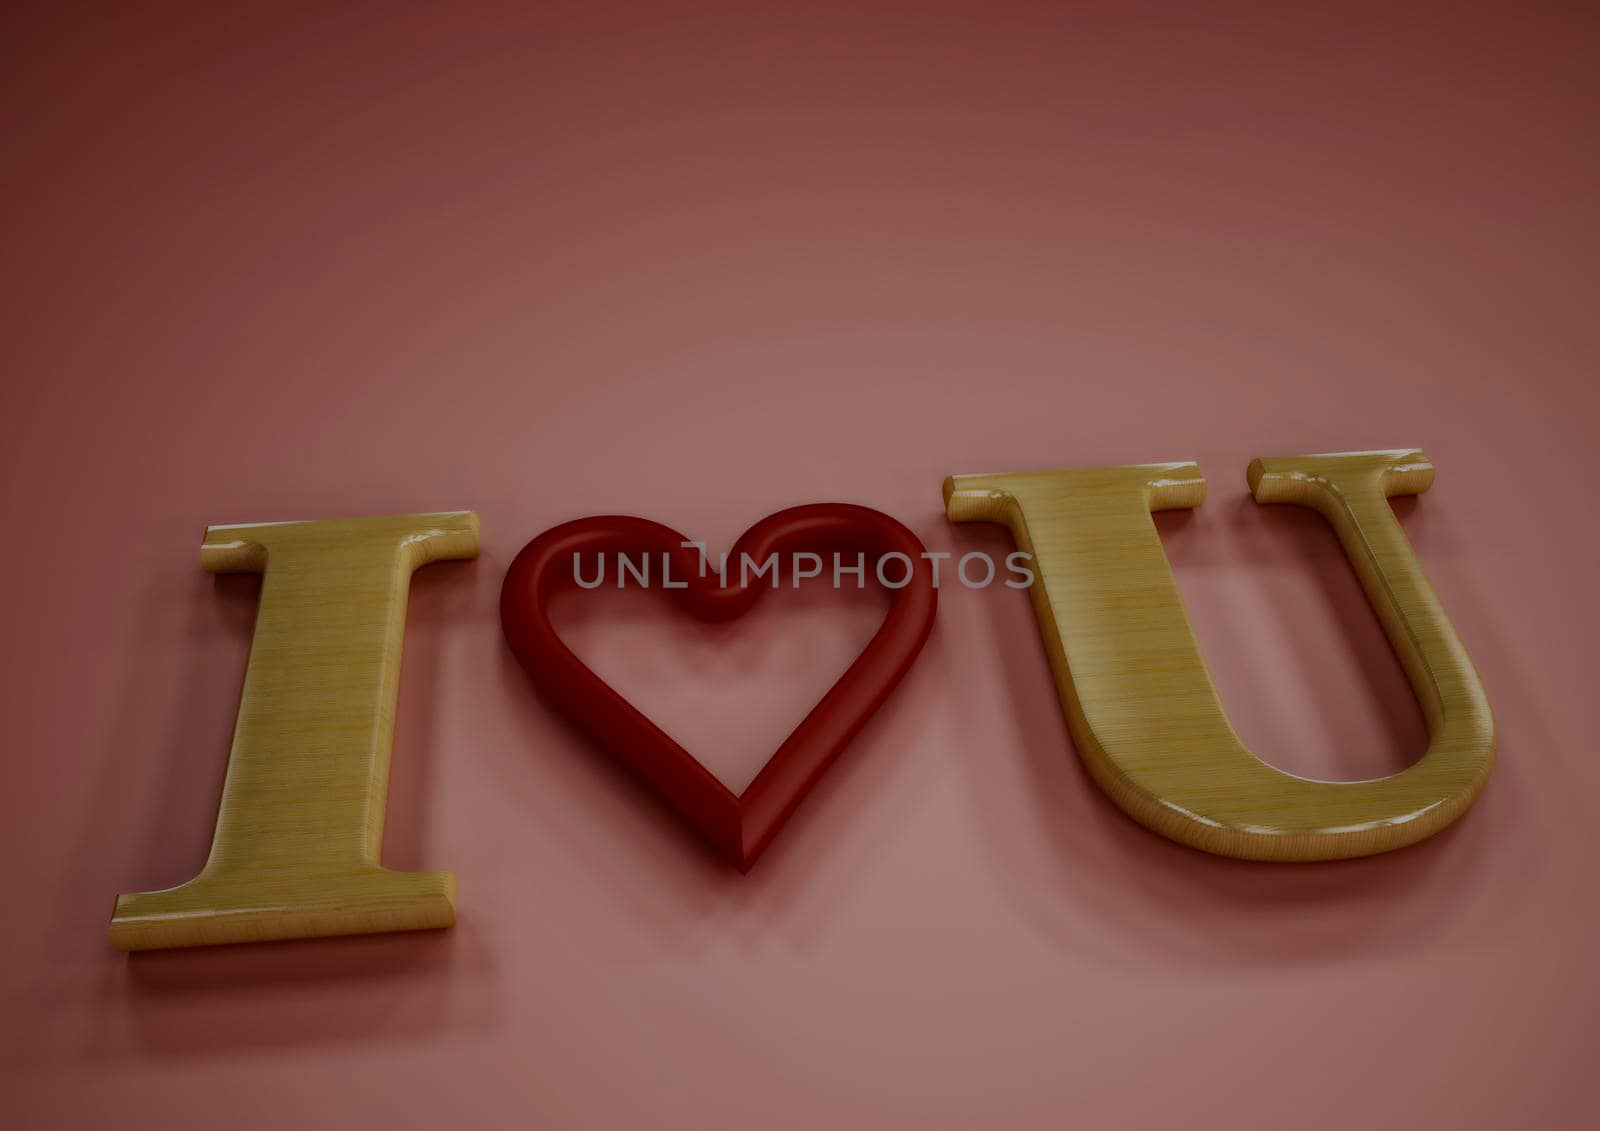 Dimensional inscription of I LOVE You and heart near it.